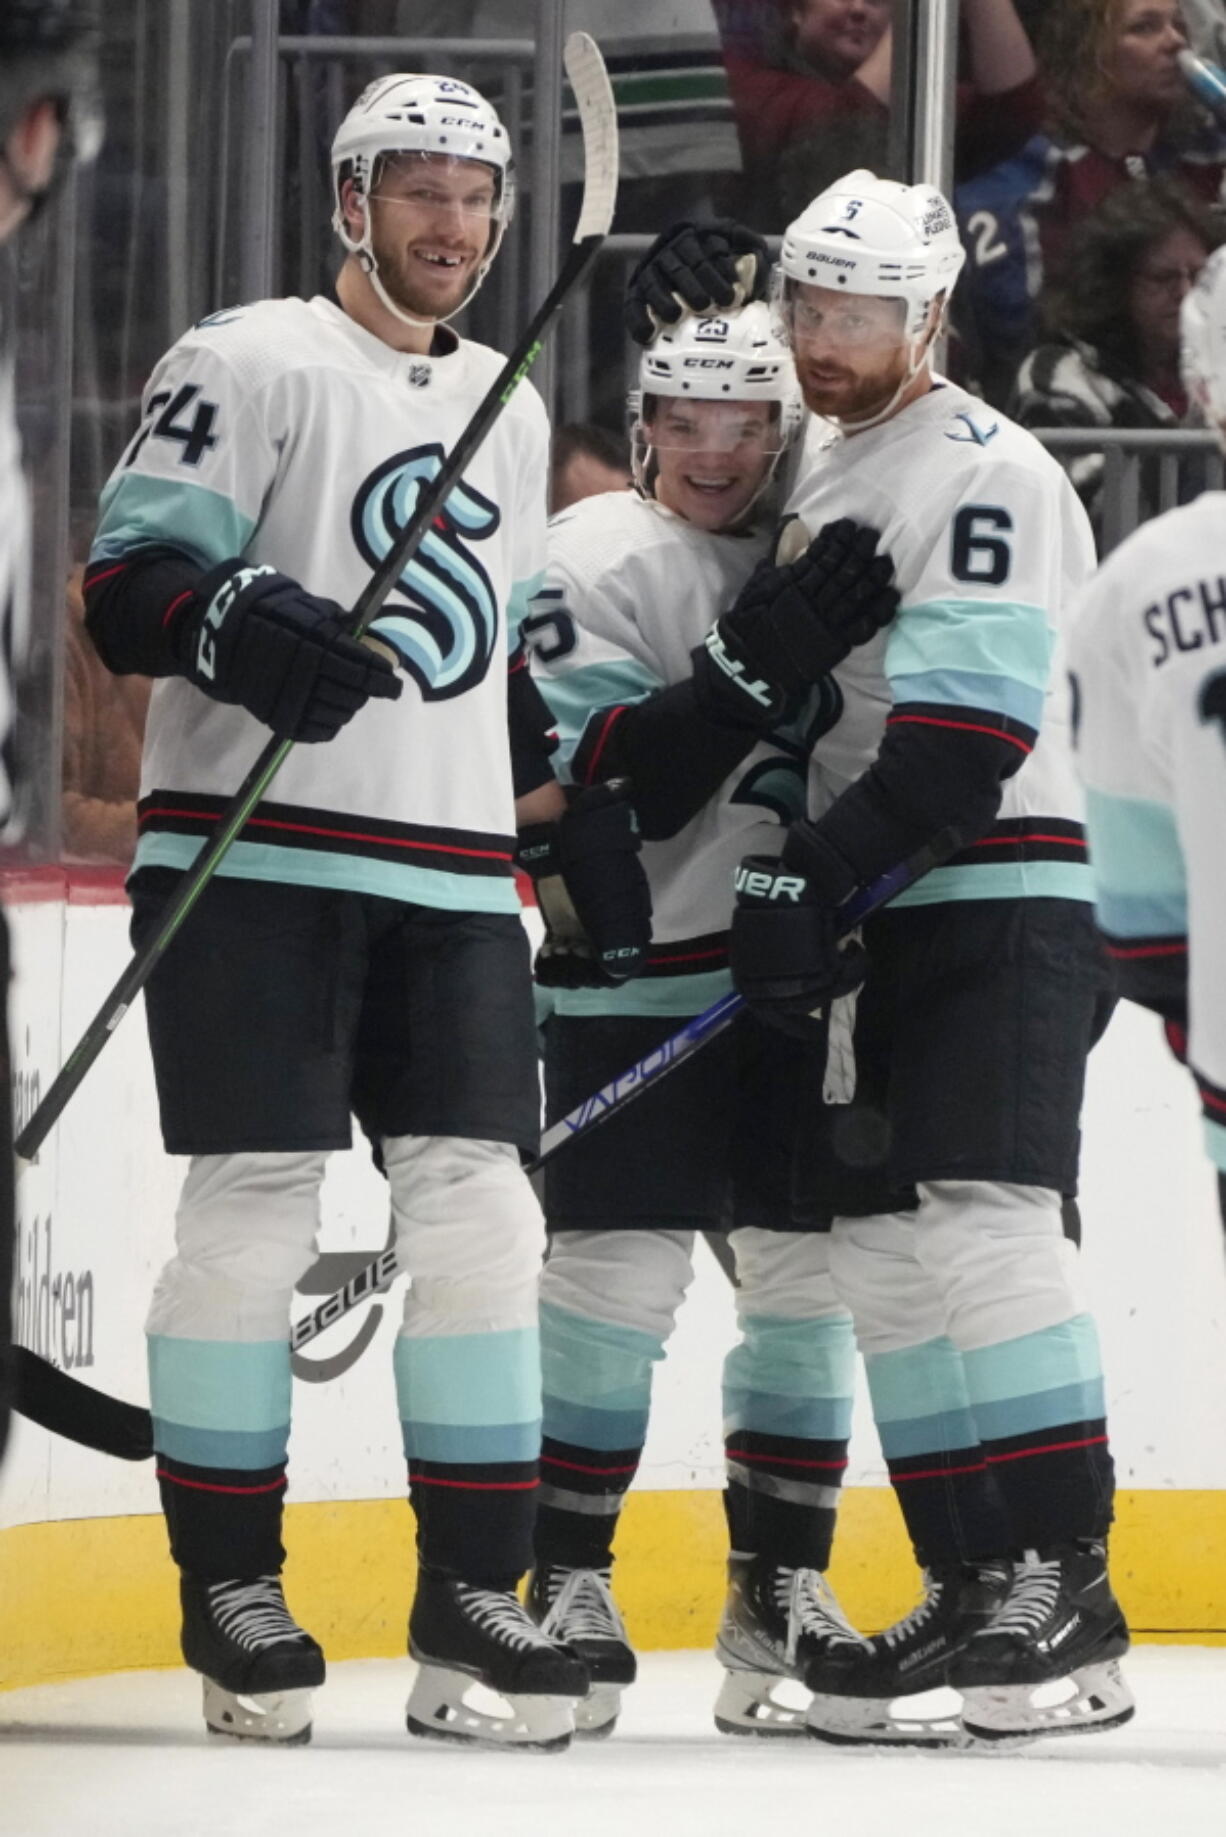 Seattle Kraken center Karson Kuhlman, center, is congratulated, after scoring the go-ahead goal against the Colorado Avalanche, by defensemen Jamie Oleksiak, left, and Adam Larsson during the third period of an NHL hockey game Friday, Oct. 21, 2022, in Denver.